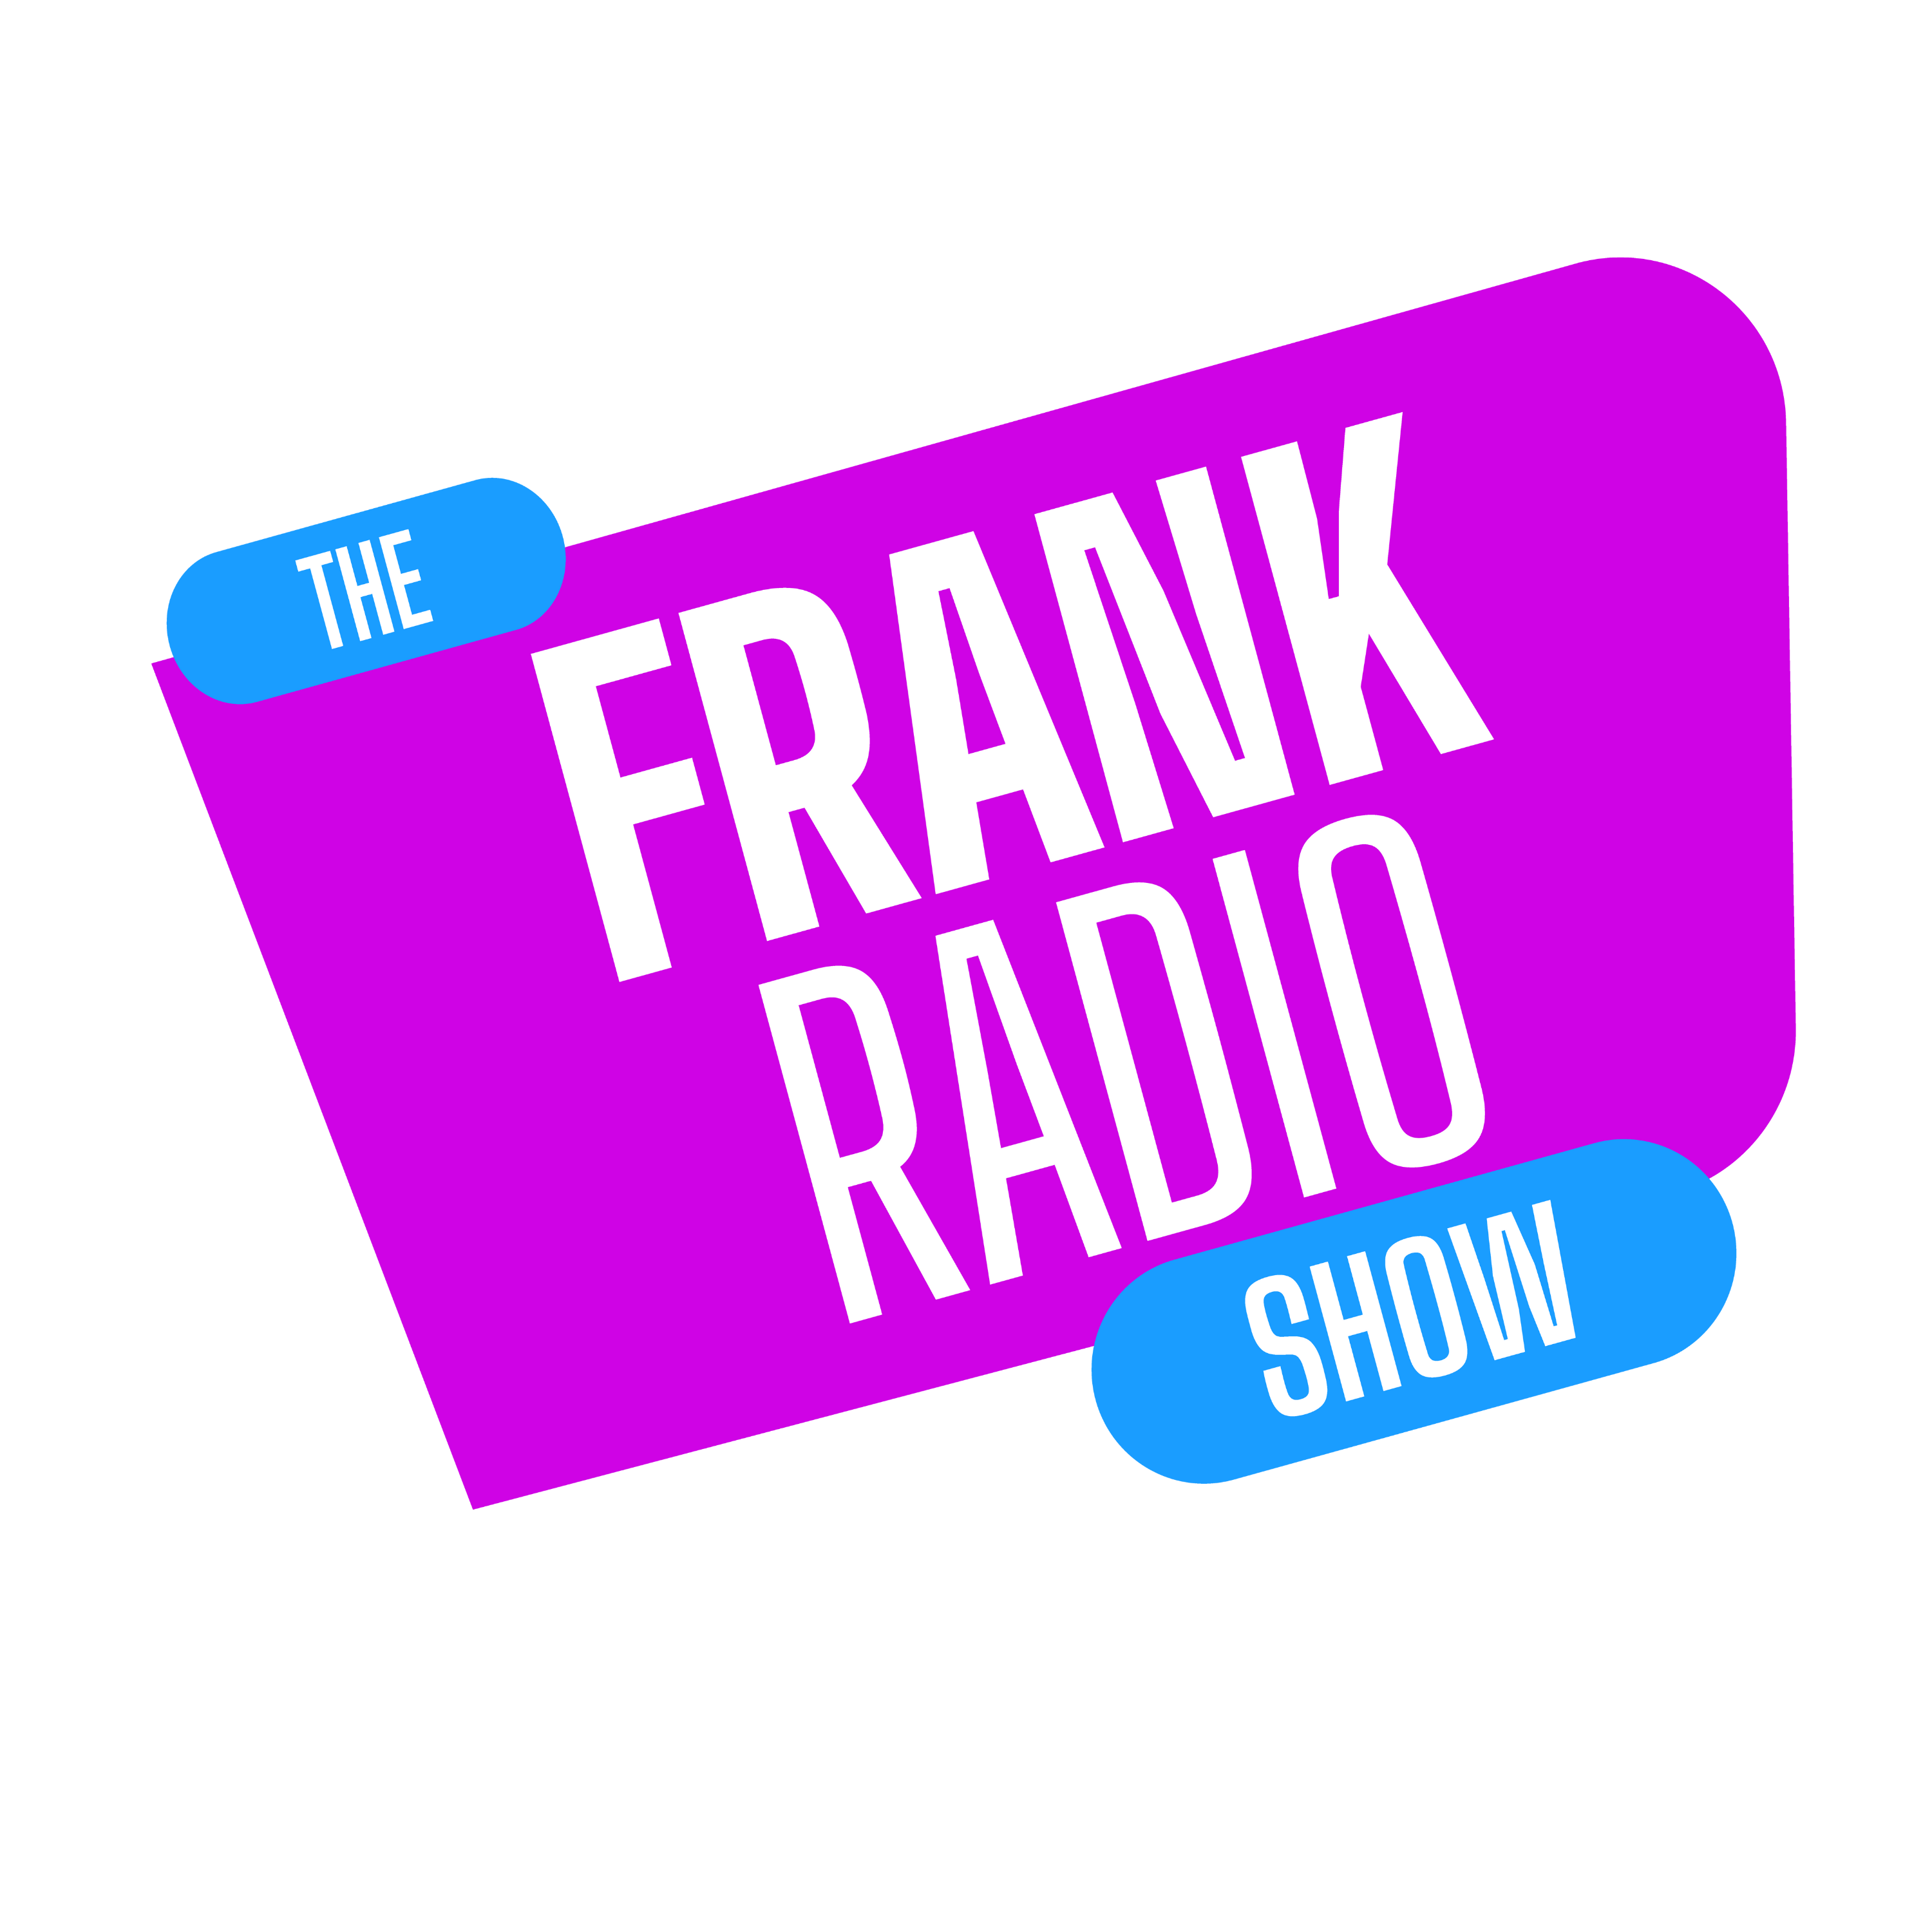 The logo of The Frank Radio Show